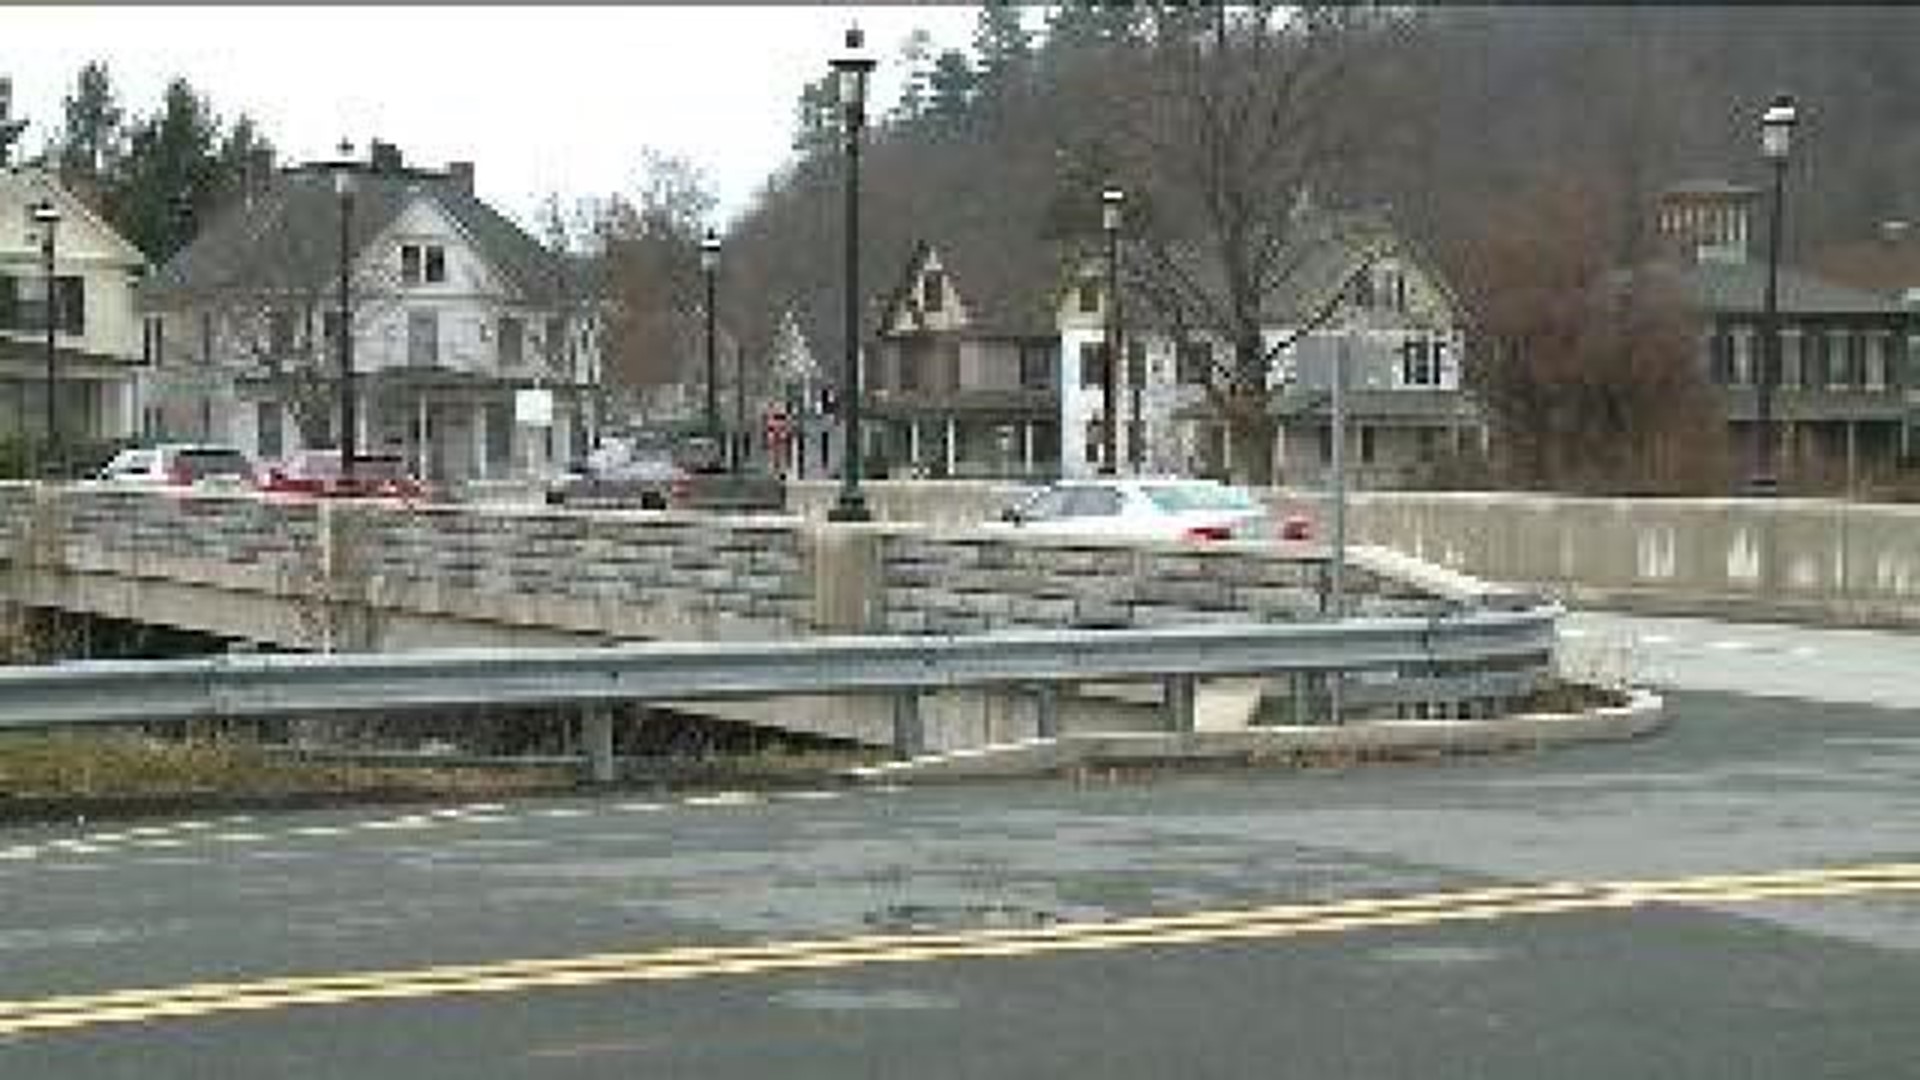 Traffic Issues Heating up Again in Honesdale